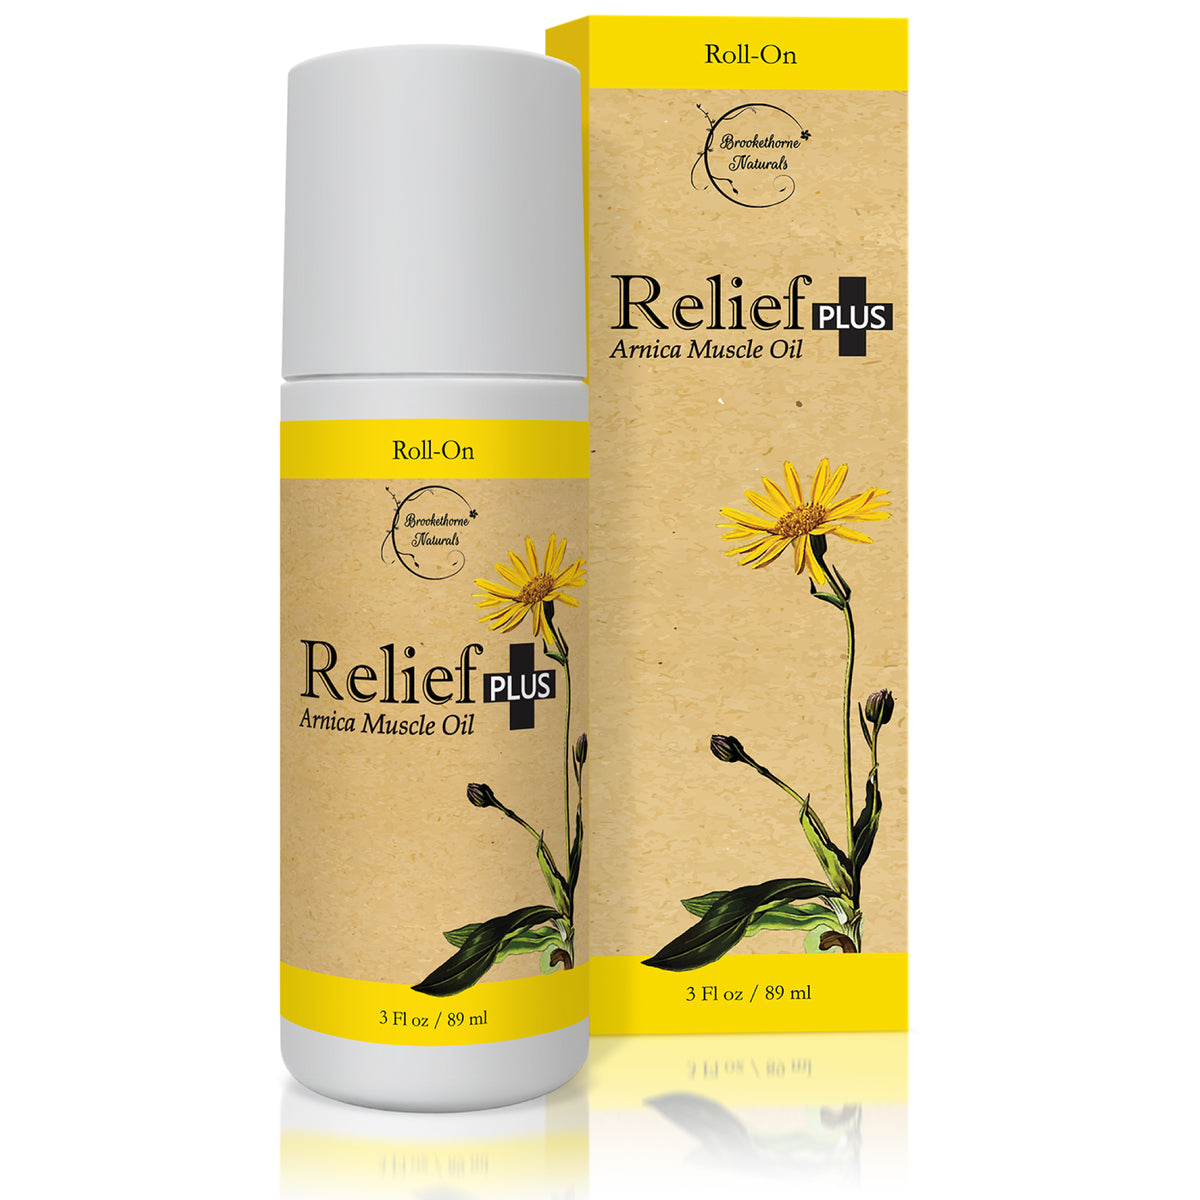 Relief Plus Arnica Muscle Oil with Box